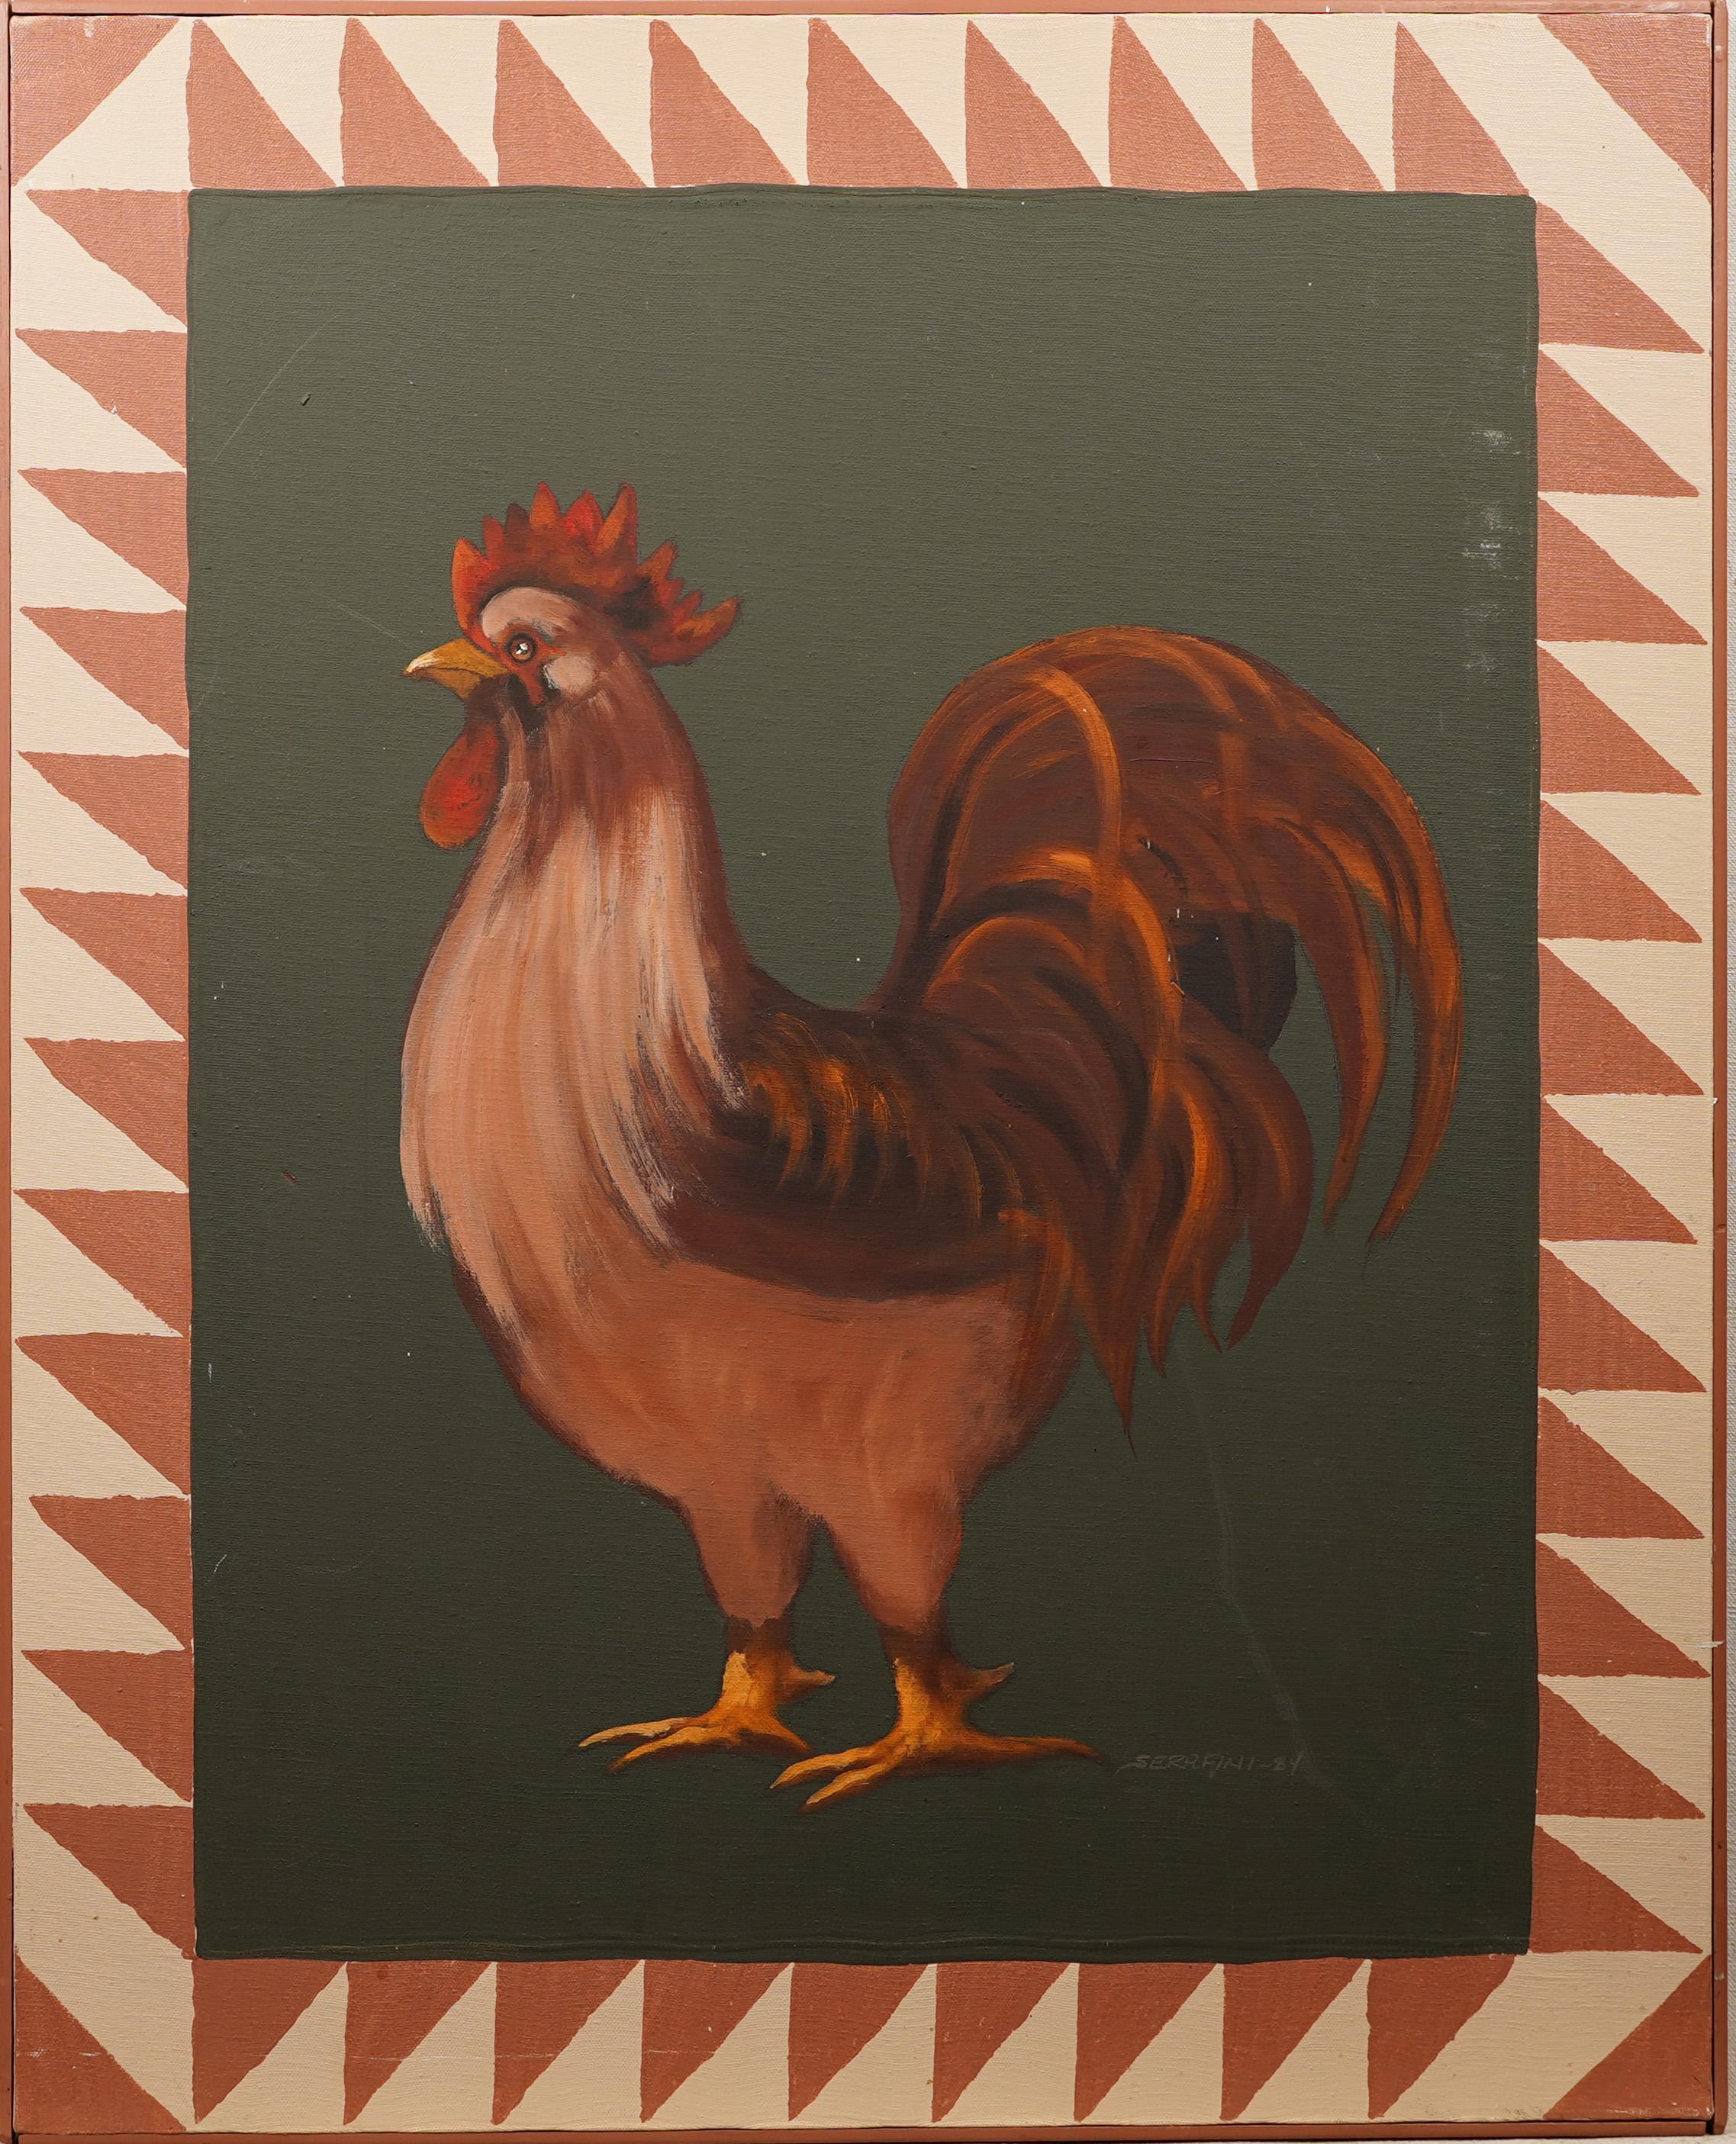 Unknown Animal Painting - Vintage Country Chic Americana Folk Art Rooster Portrait Original Oil Painting